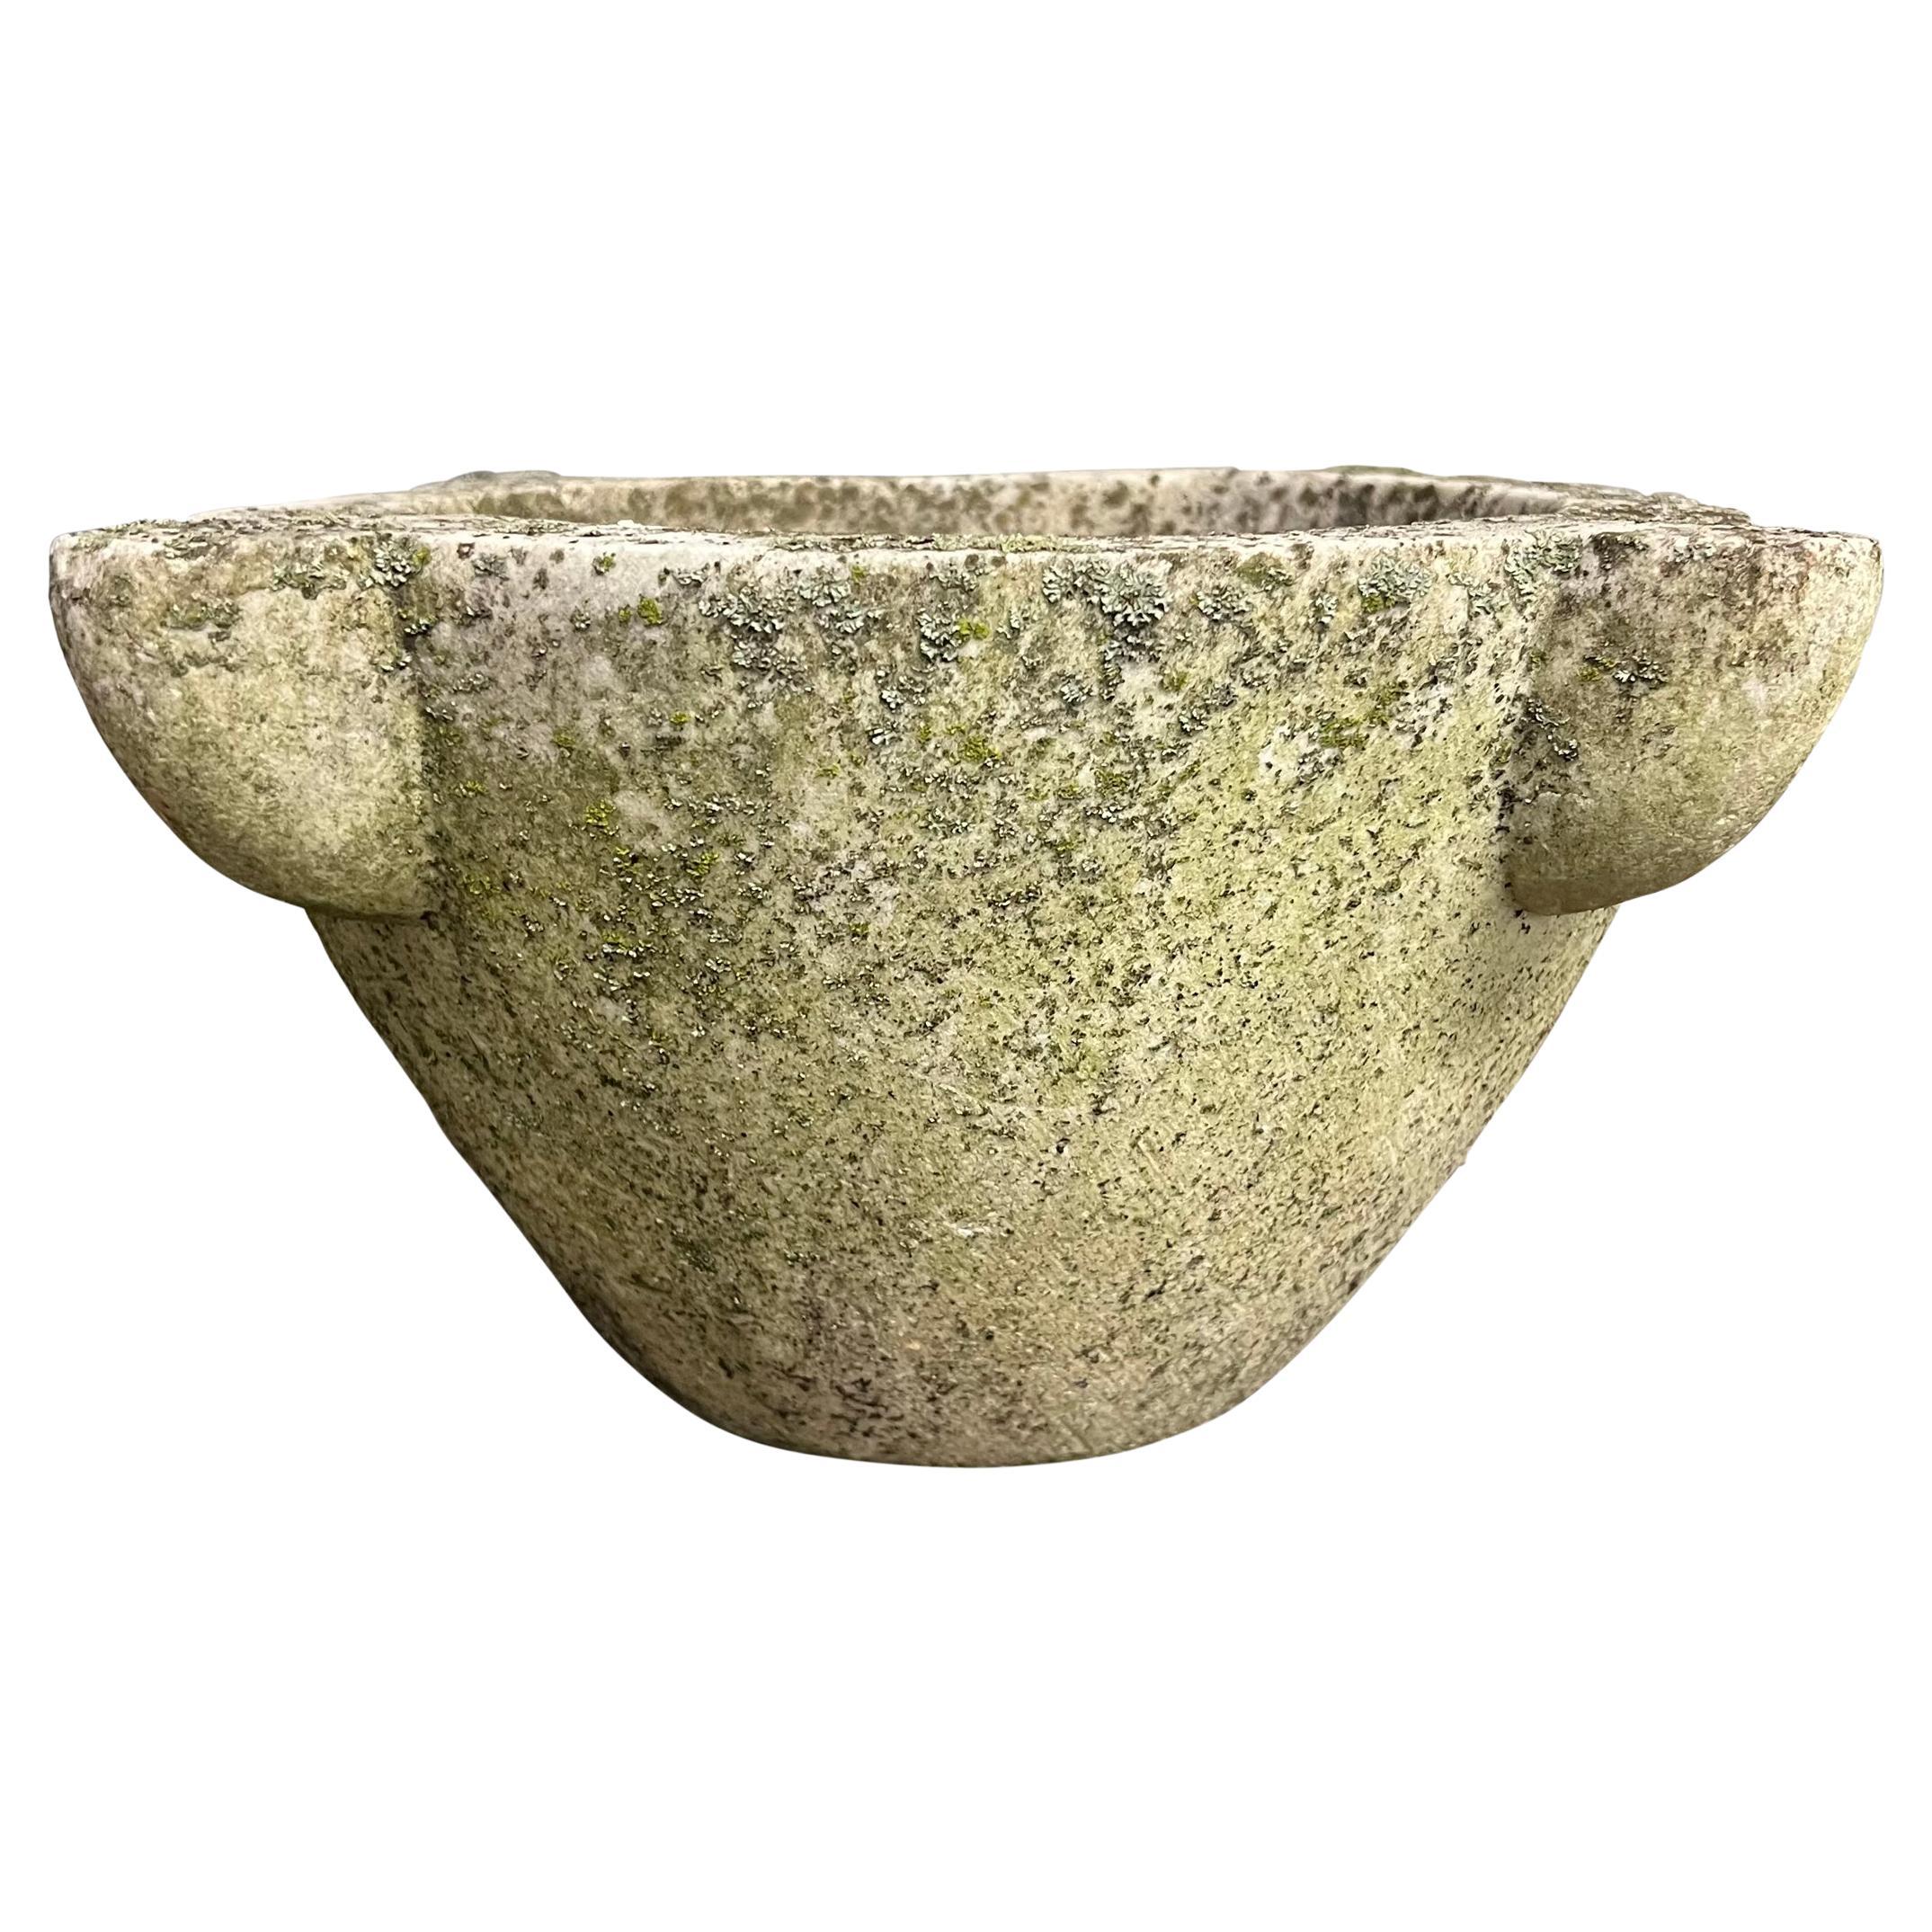 19th Century French Moss and Lichen Covered Marble Mortar